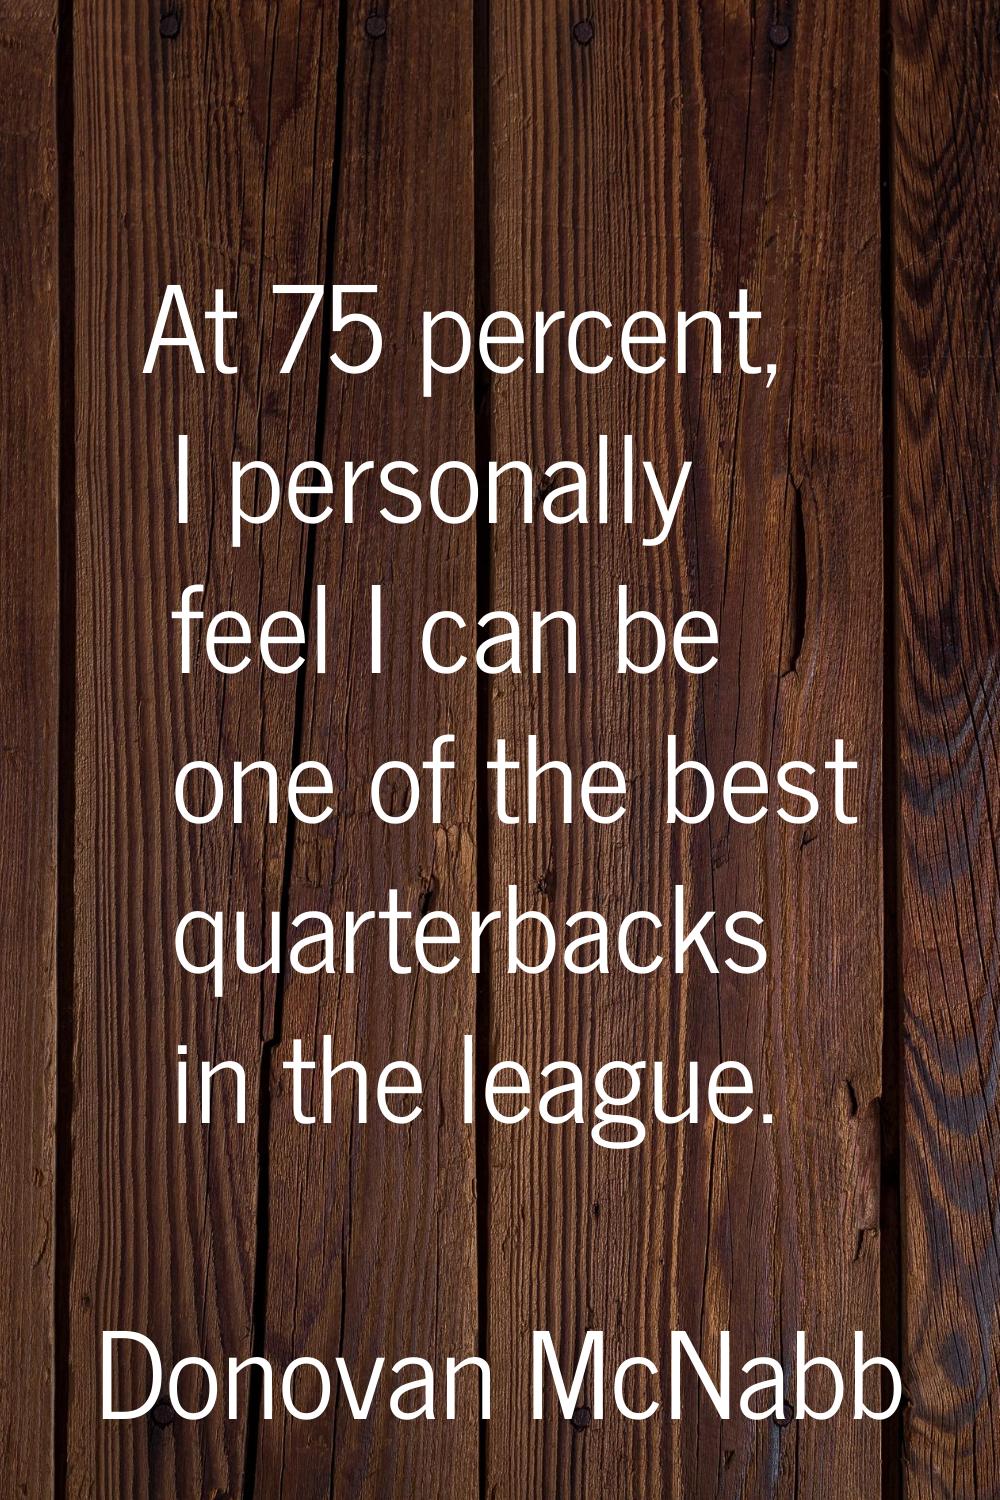 At 75 percent, I personally feel I can be one of the best quarterbacks in the league.